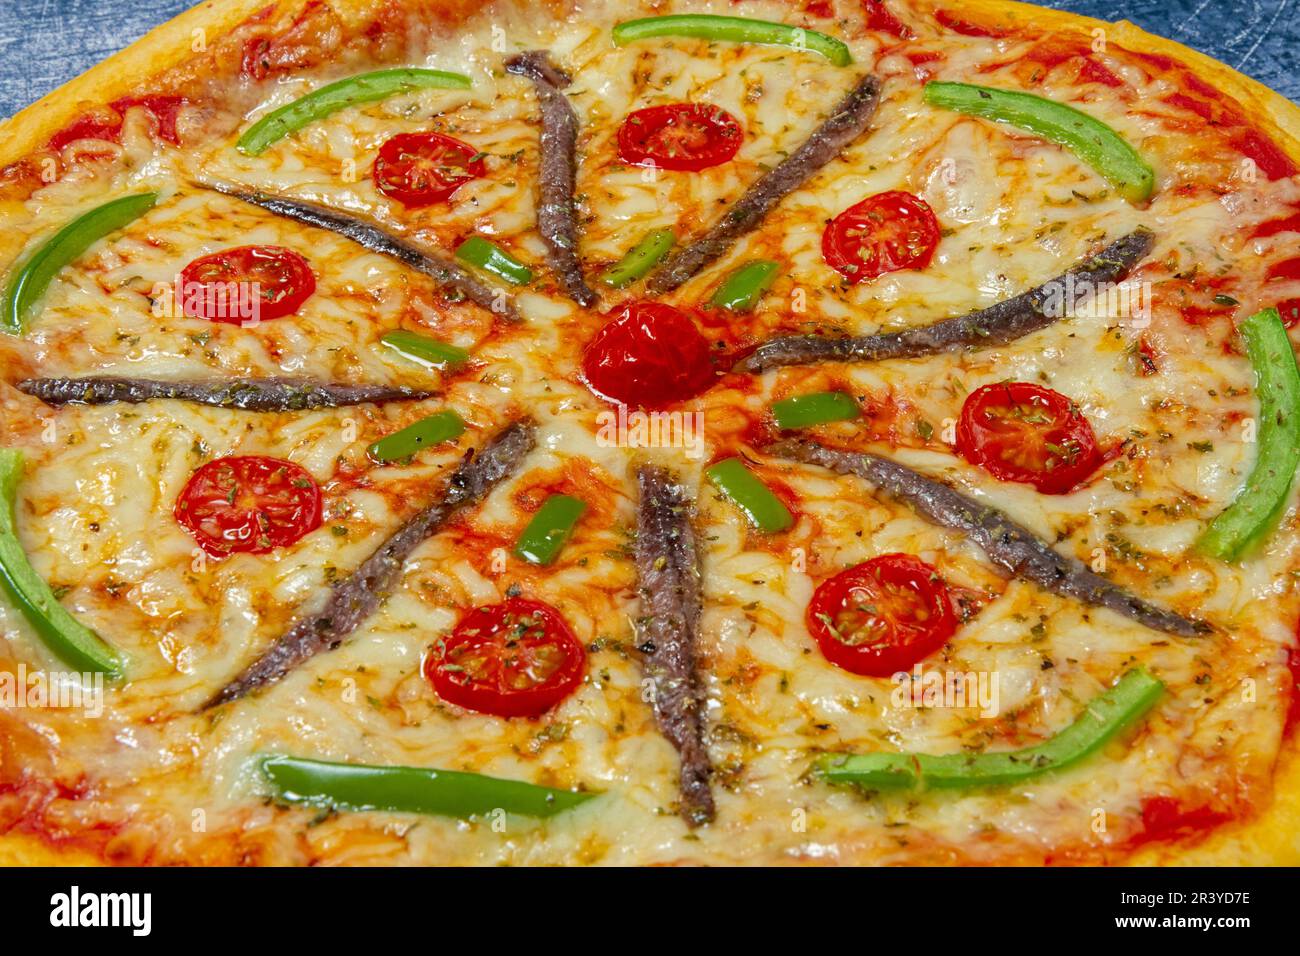 home-made pizza, wheel pattern, close up Stock Photo